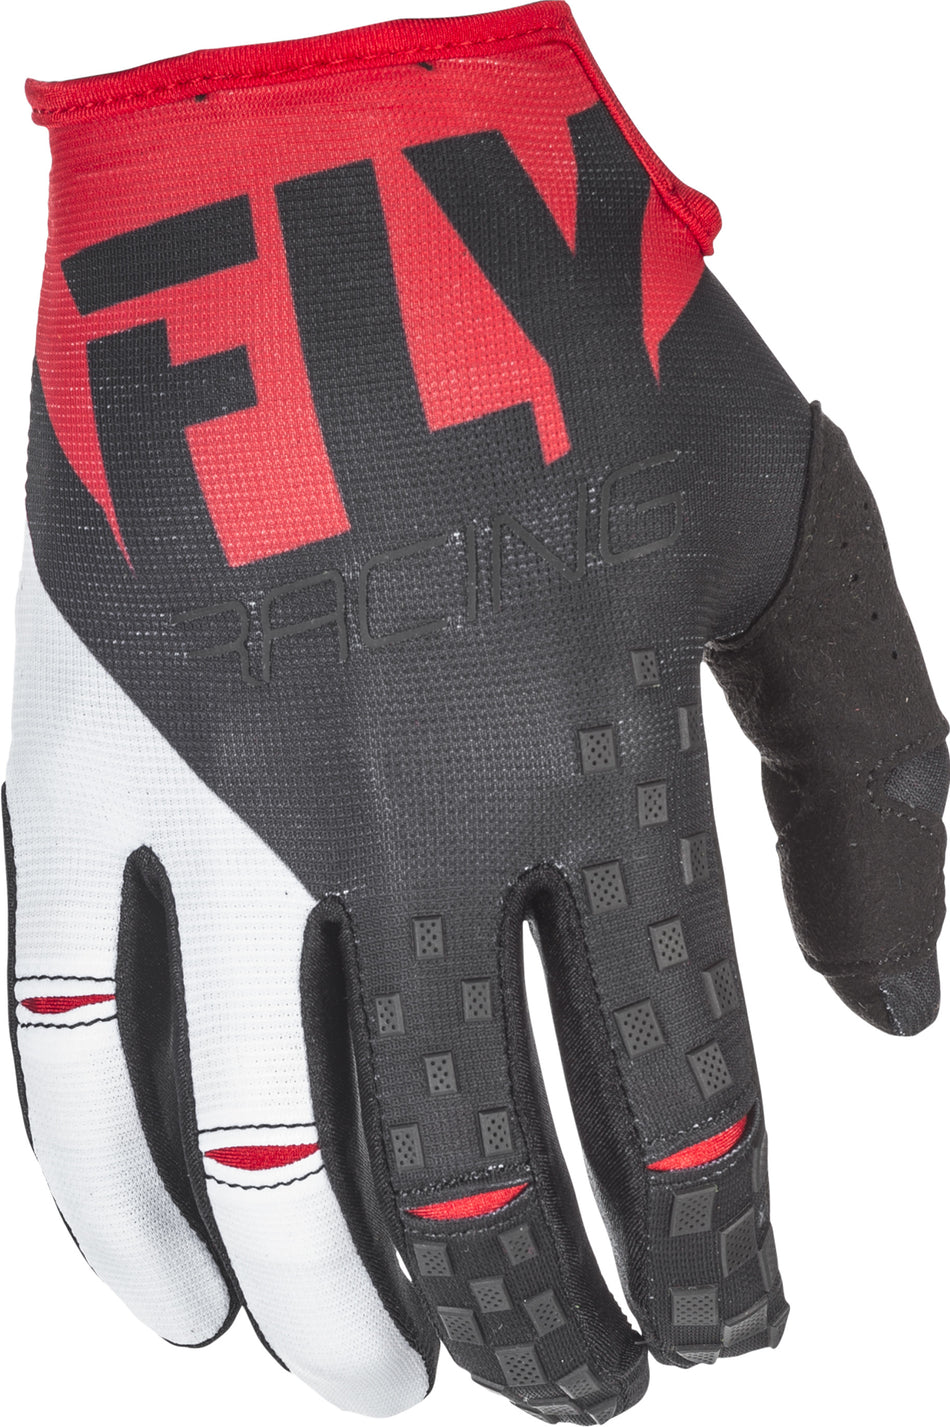 FLY RACING Kinetic Gloves Red/Black Sz 9 371-41209